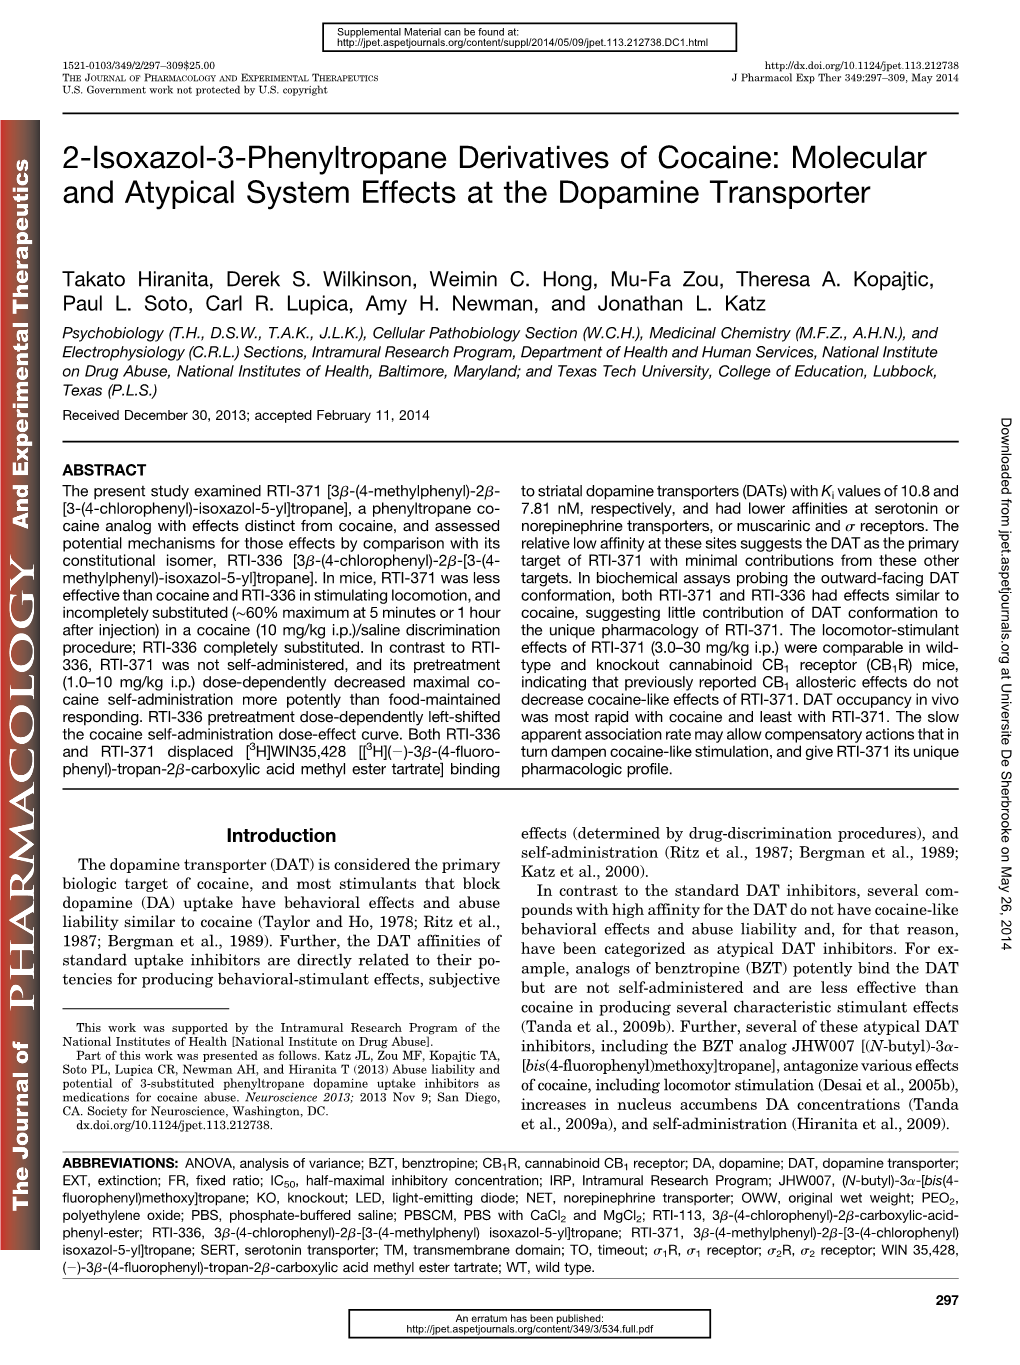 2-Isoxazol-3-Phenyltropane Derivatives of Cocaine: Molecular and Atypical System Effects at the Dopamine Transporter